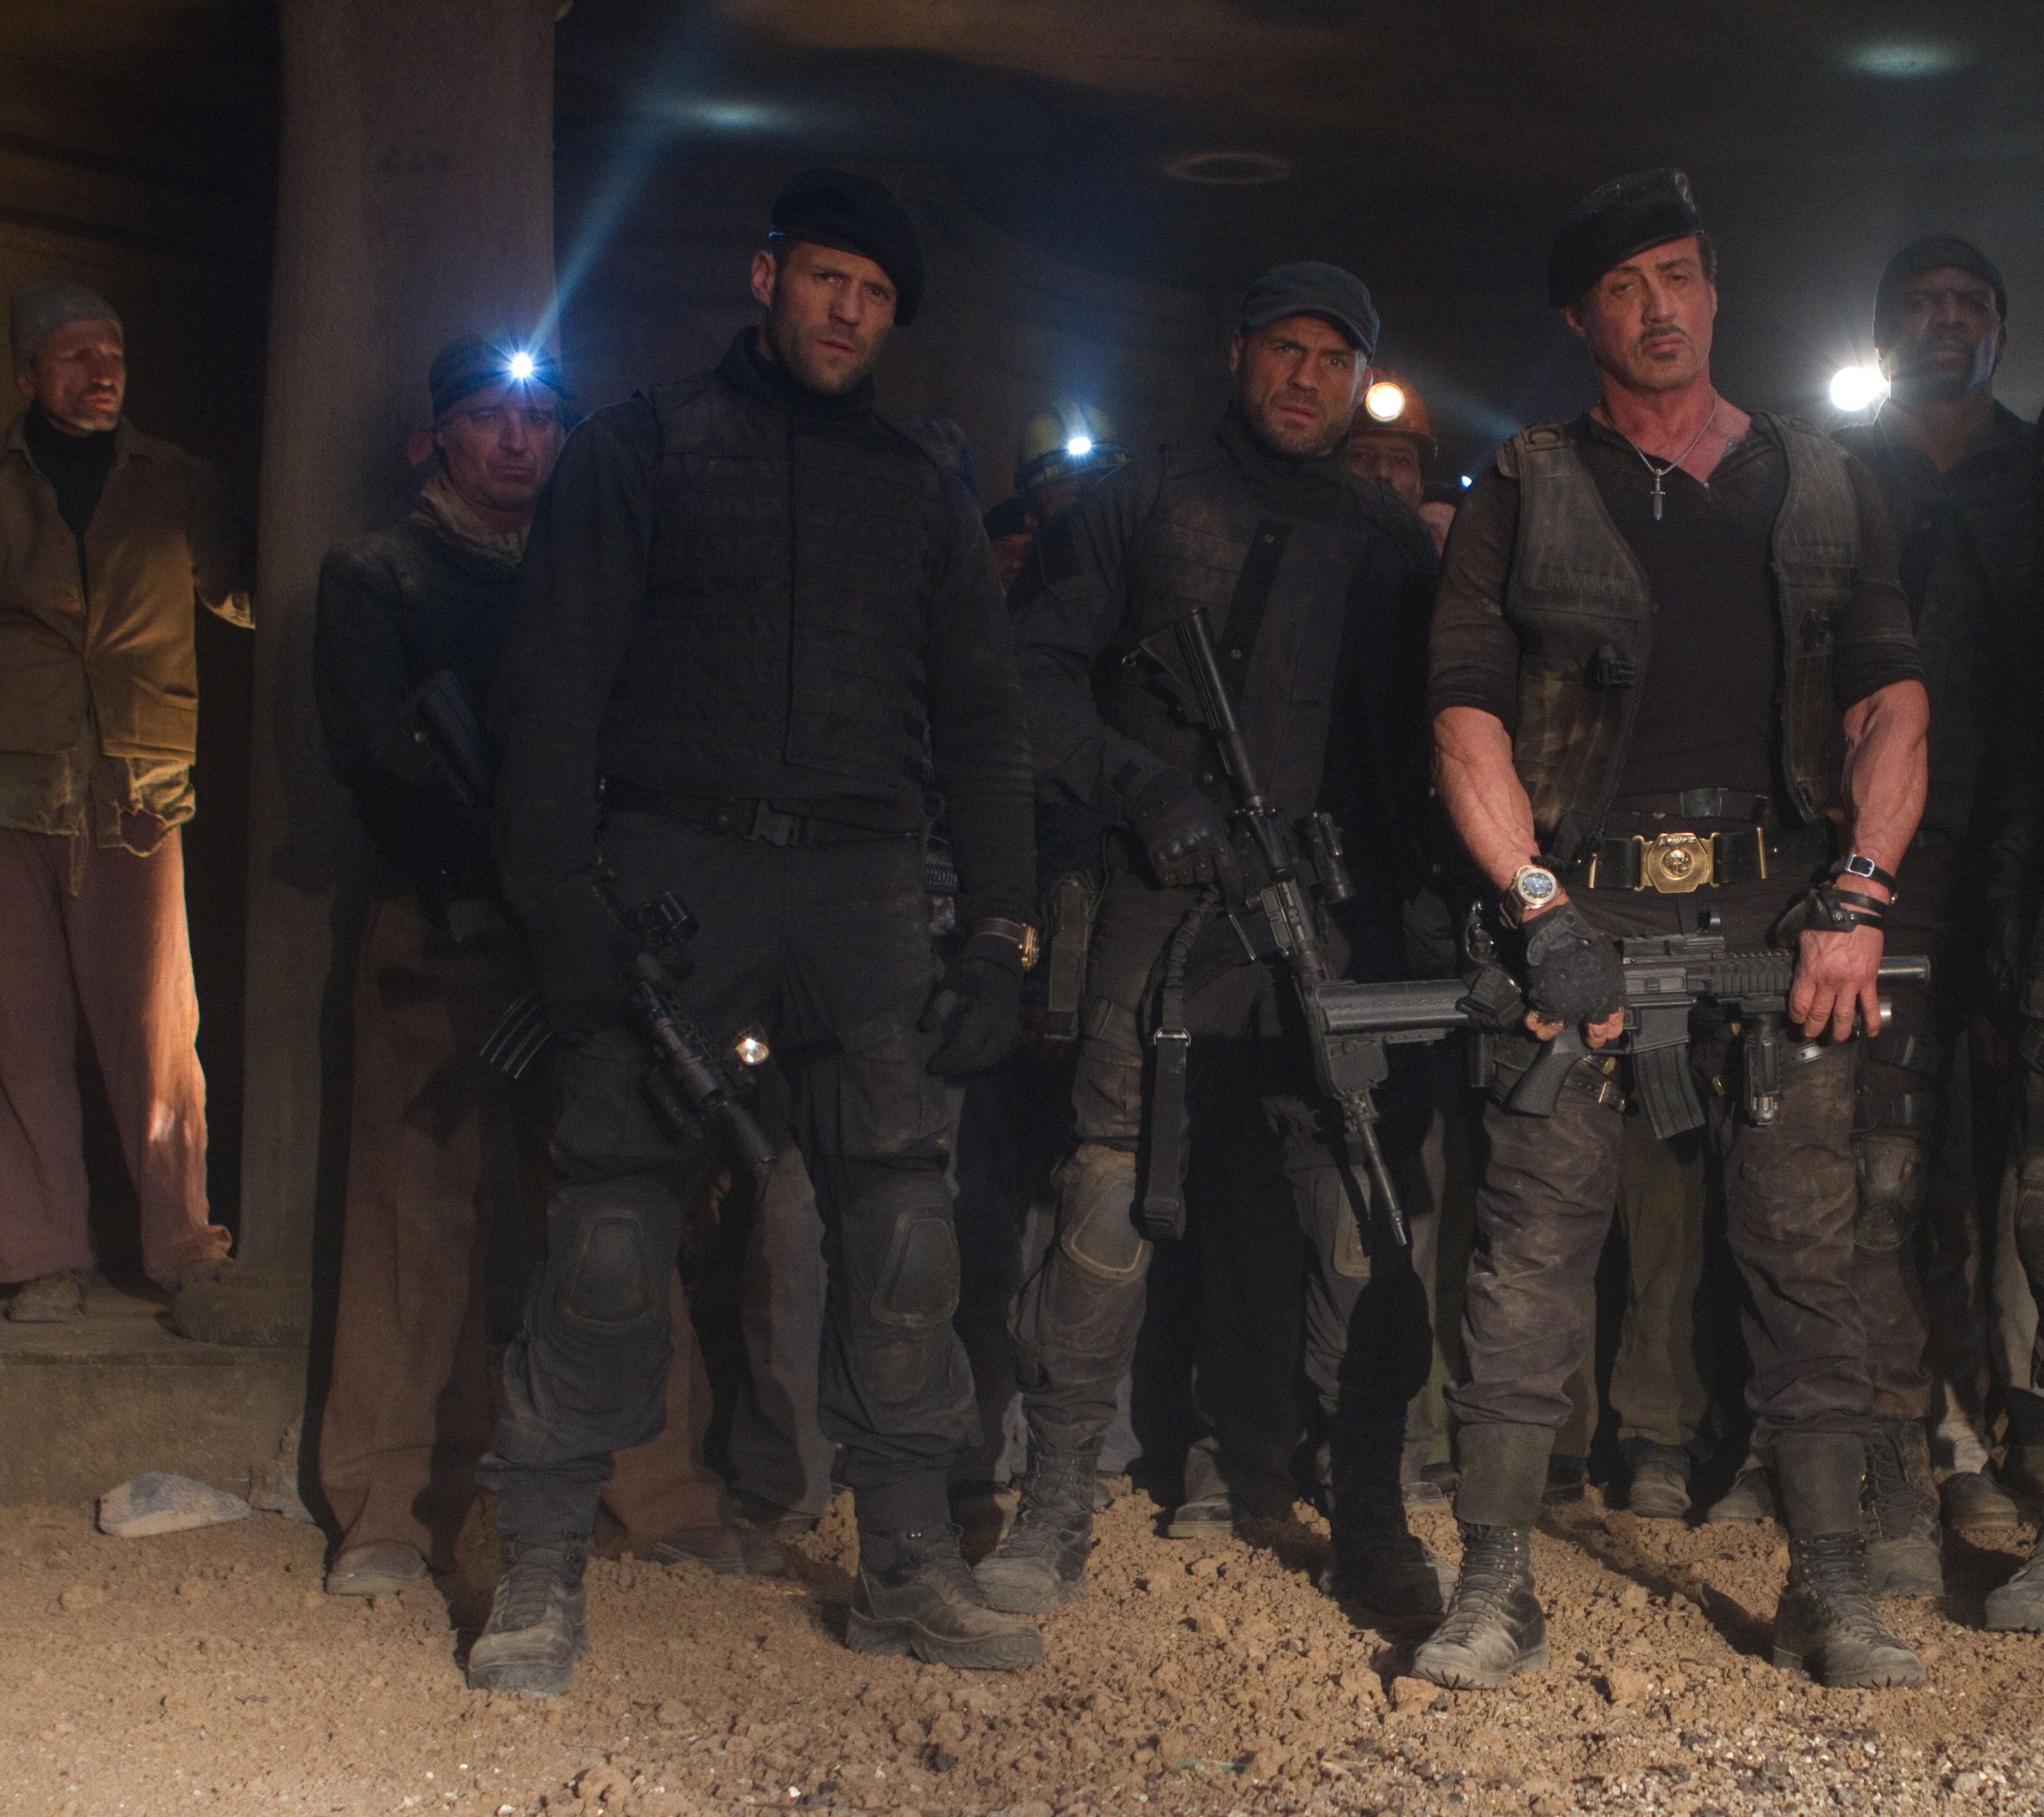 movie, the expendables 2, randy couture, sylvester stallone, dolph lundgren, jason statham, terry crews, hale caesar, barney ross, lee christmas, gunnar jensen, toll road, nan yu, maggie (the expendables), the expendables 5K